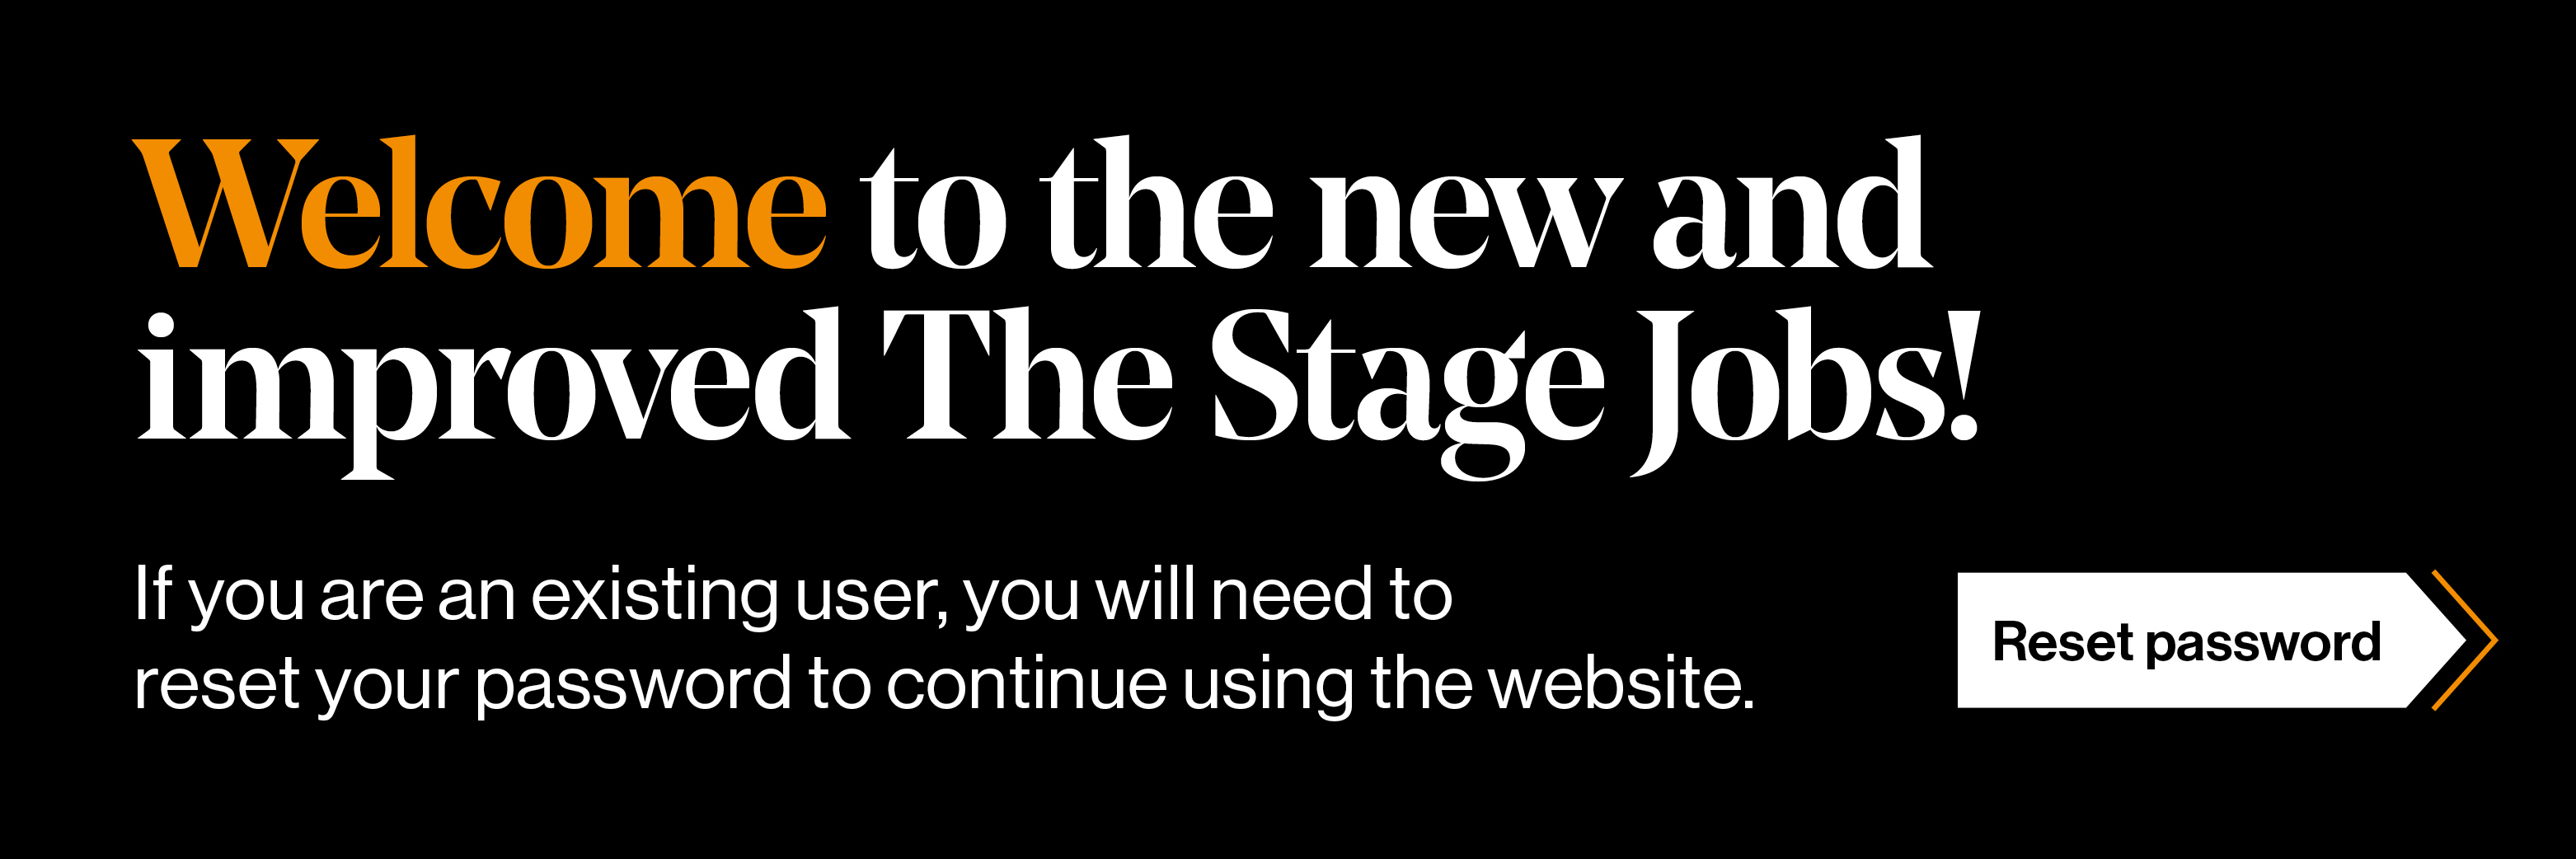 Welcome to the new The Stage Jobs website. If you are an existing user, you will need to reset your password